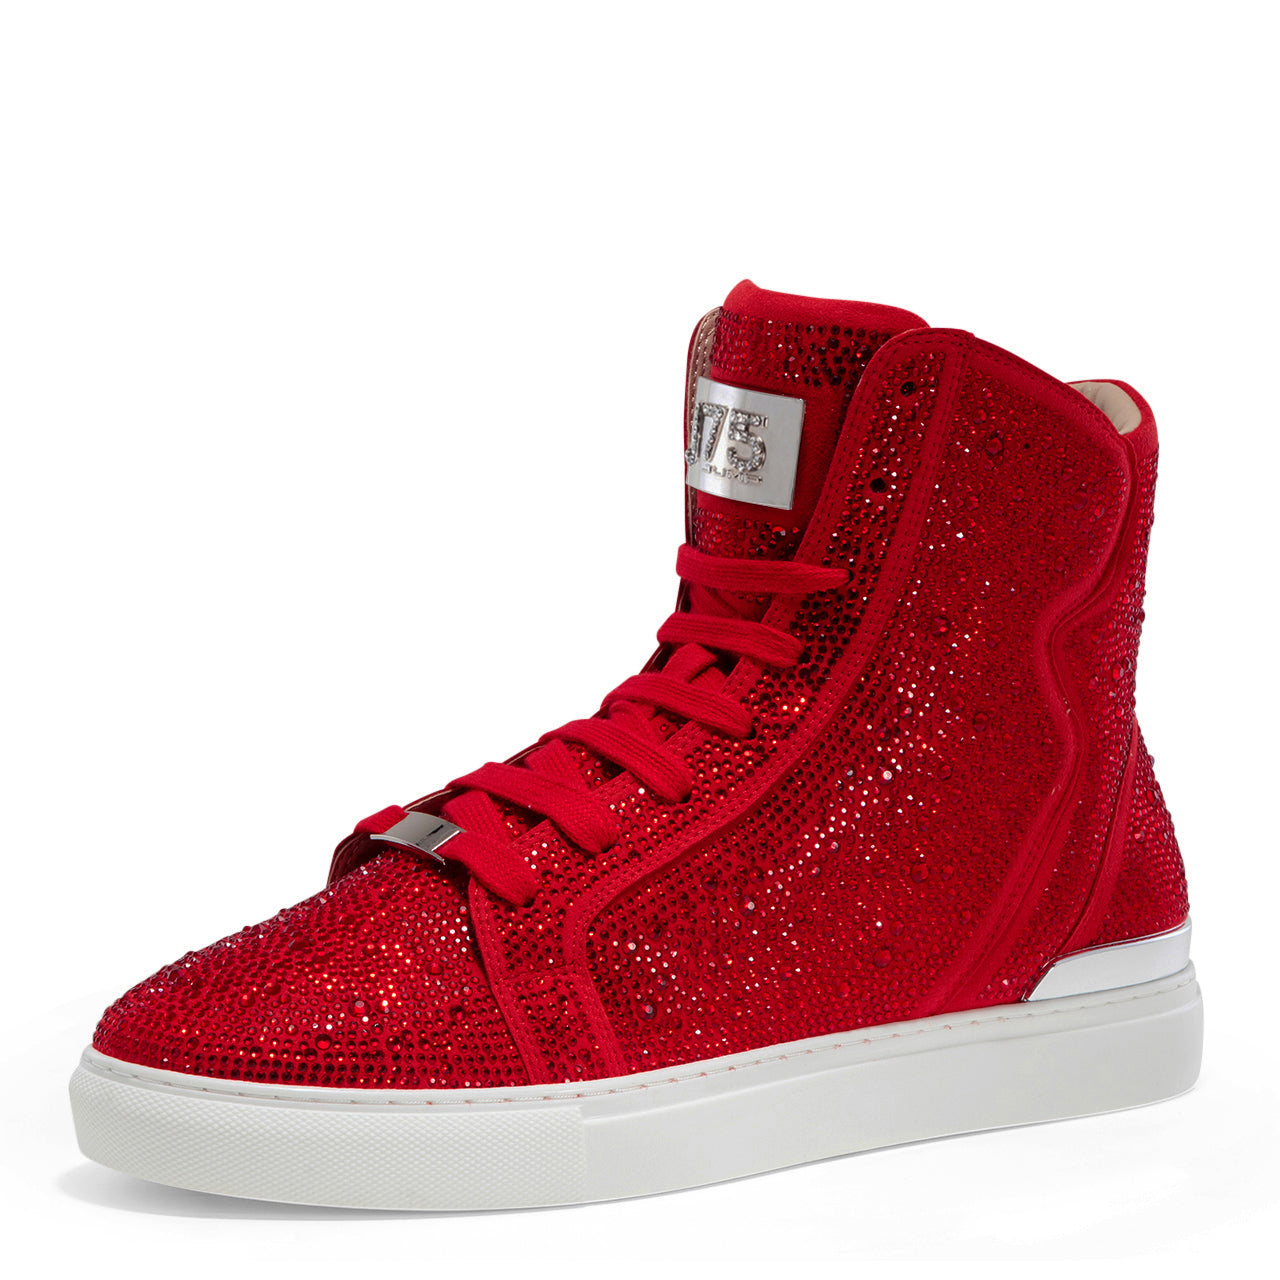 Sestos - Red High top Fashion Sneakers for Men by J75 